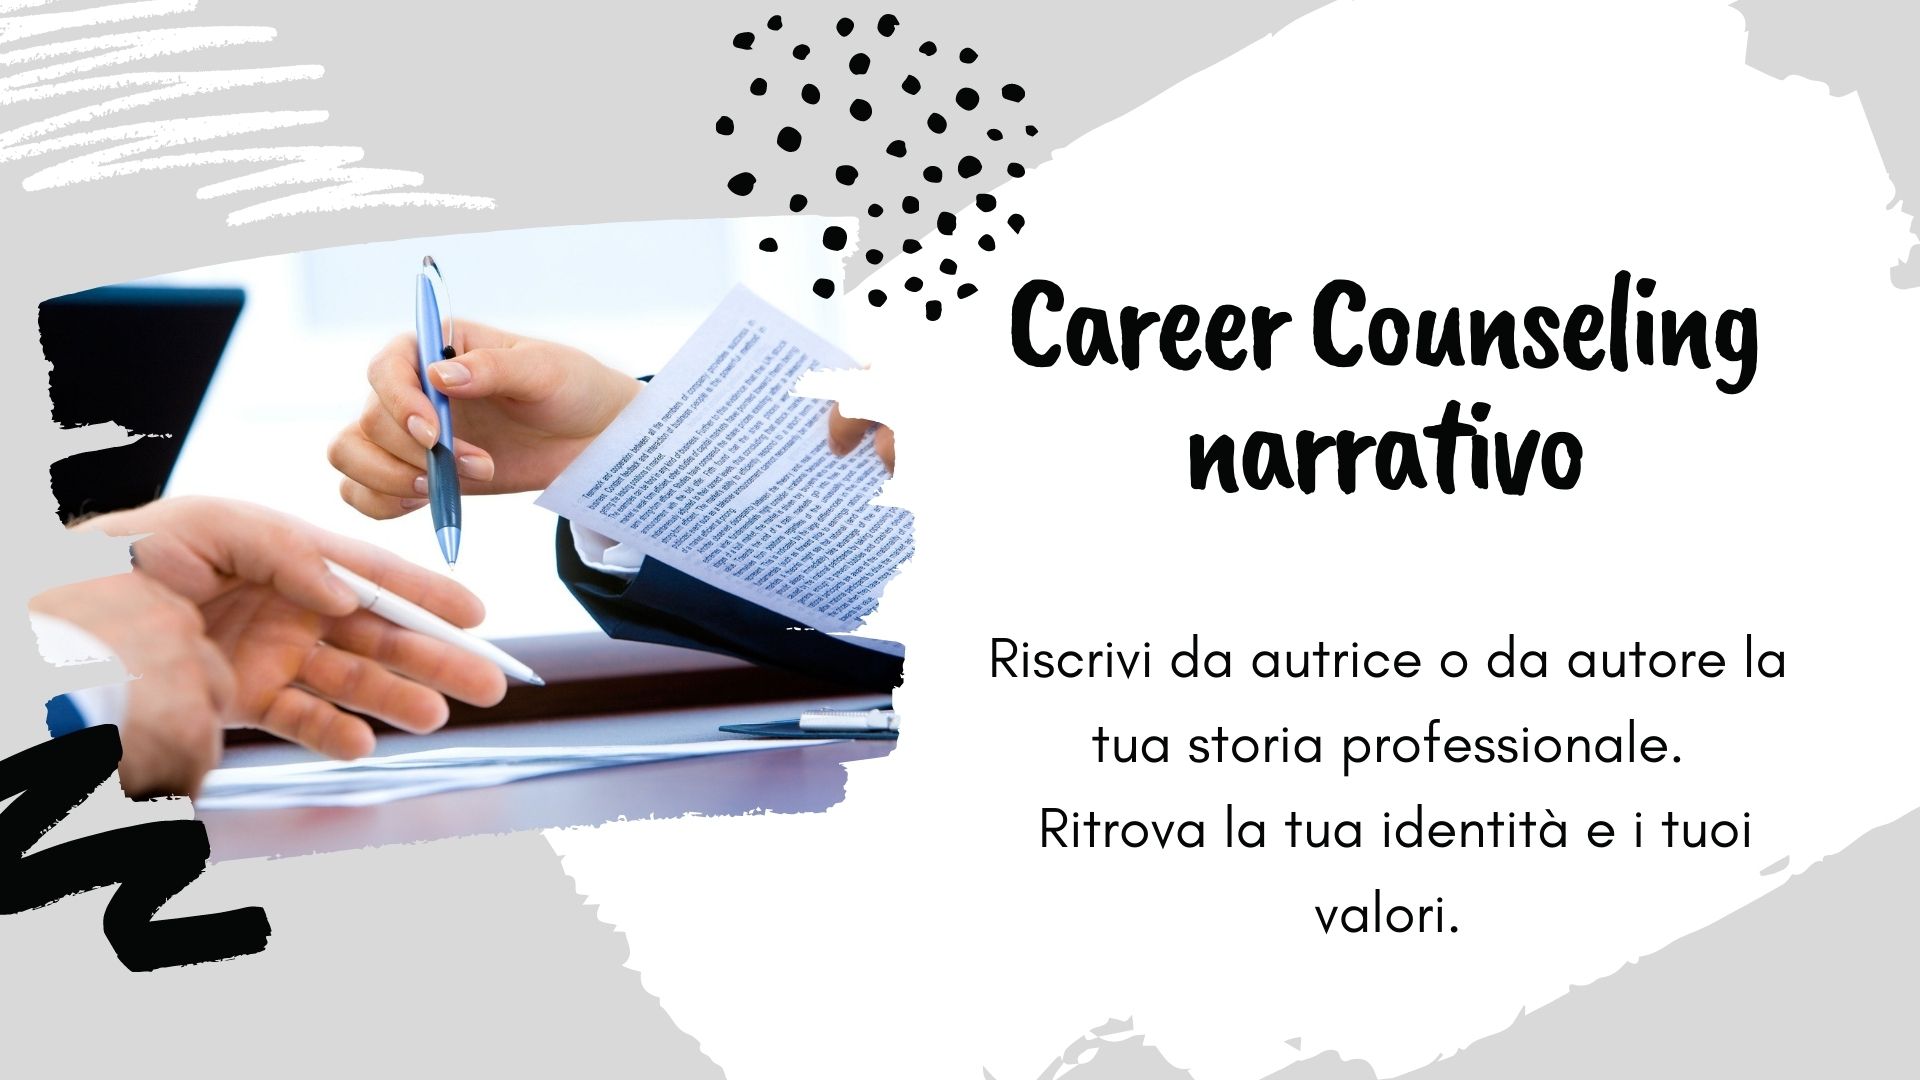 Il Career Counseling narrativo